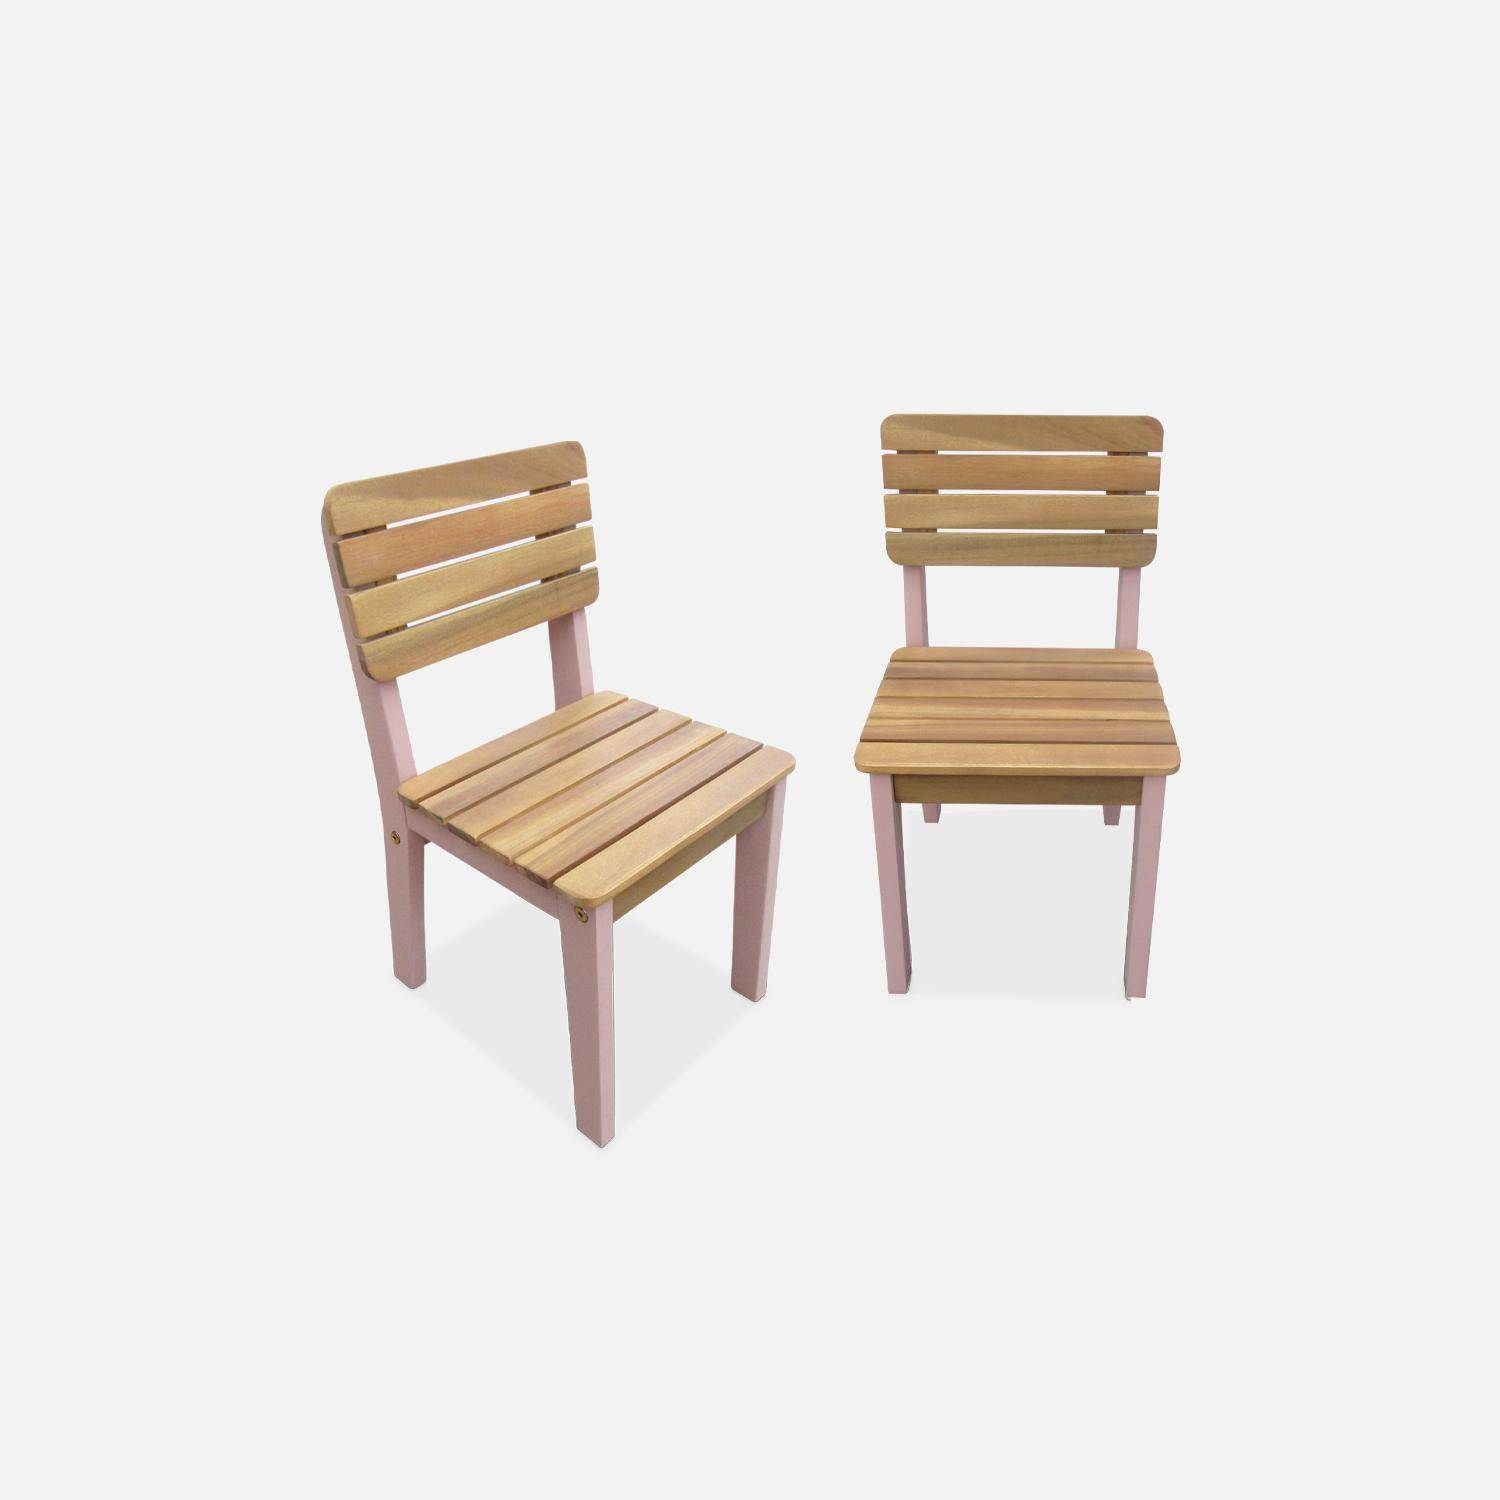 Solid Wood Chairs for Children, Indoor/Outdoor (Set of 2), pink, L29 x D31.5 x H53 cm,sweeek,Photo3